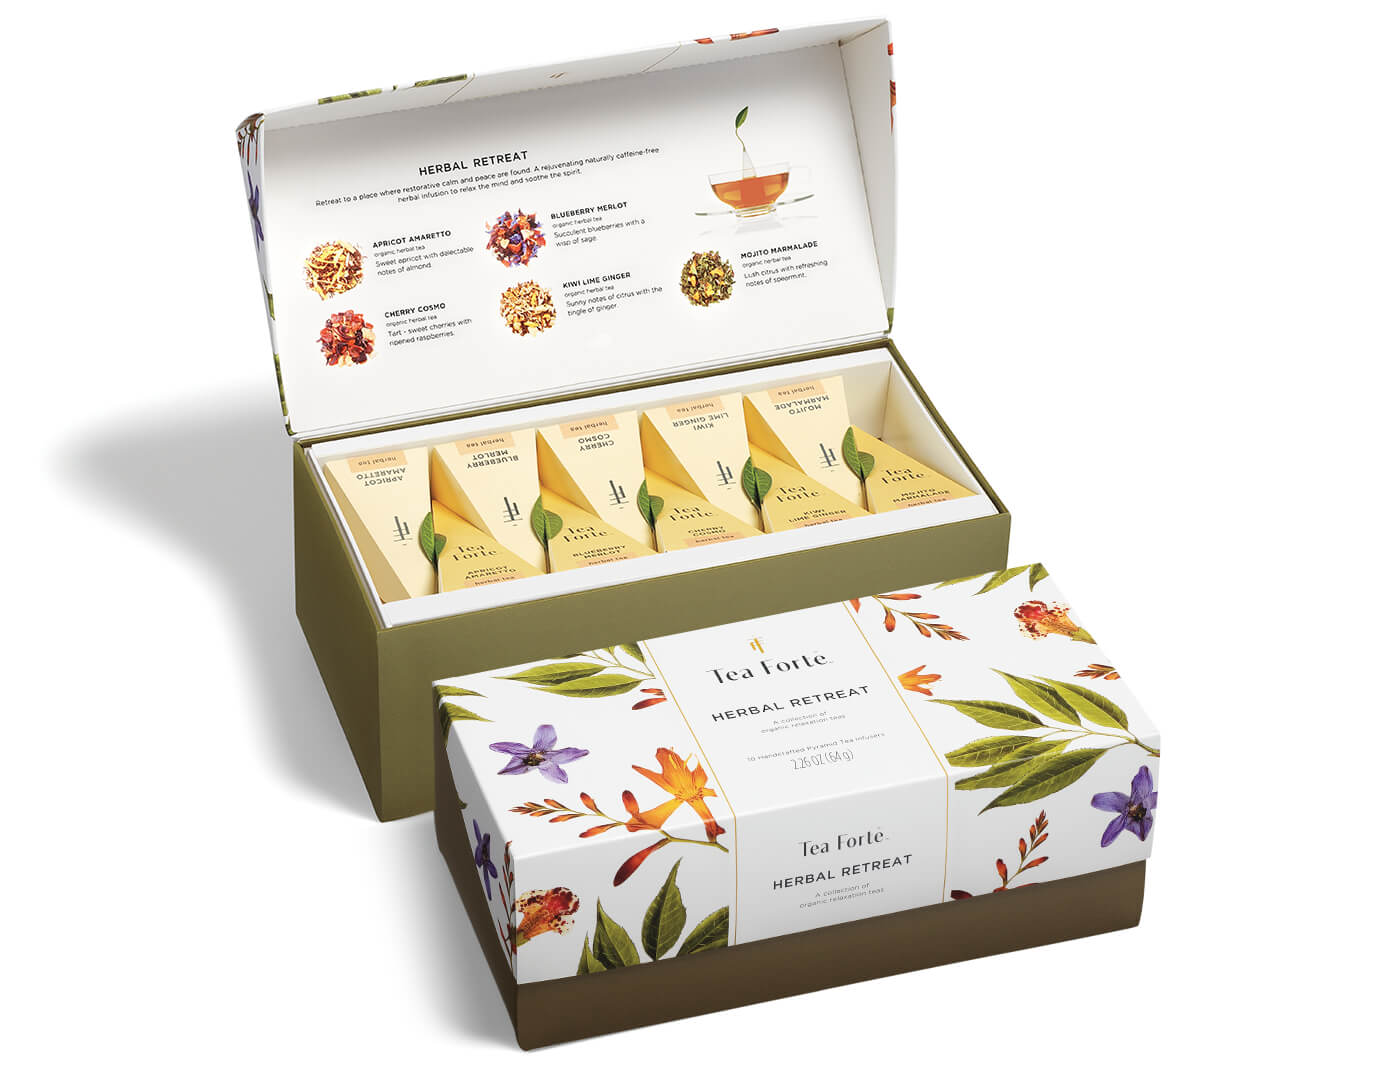 Herbal Retreat Presentation Box, lid closed and open